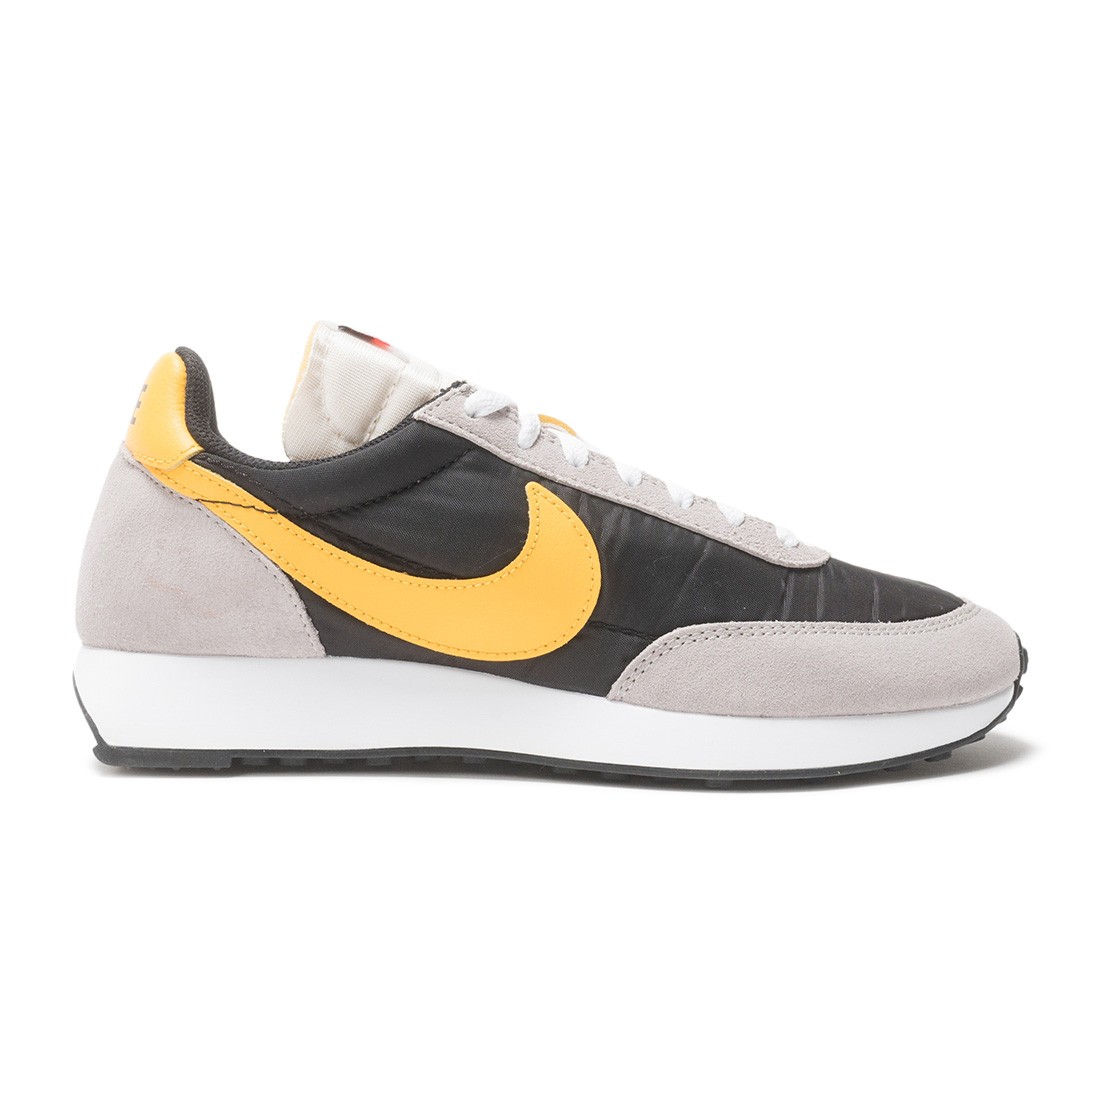 nike air tailwind 79 university gold college grey sail